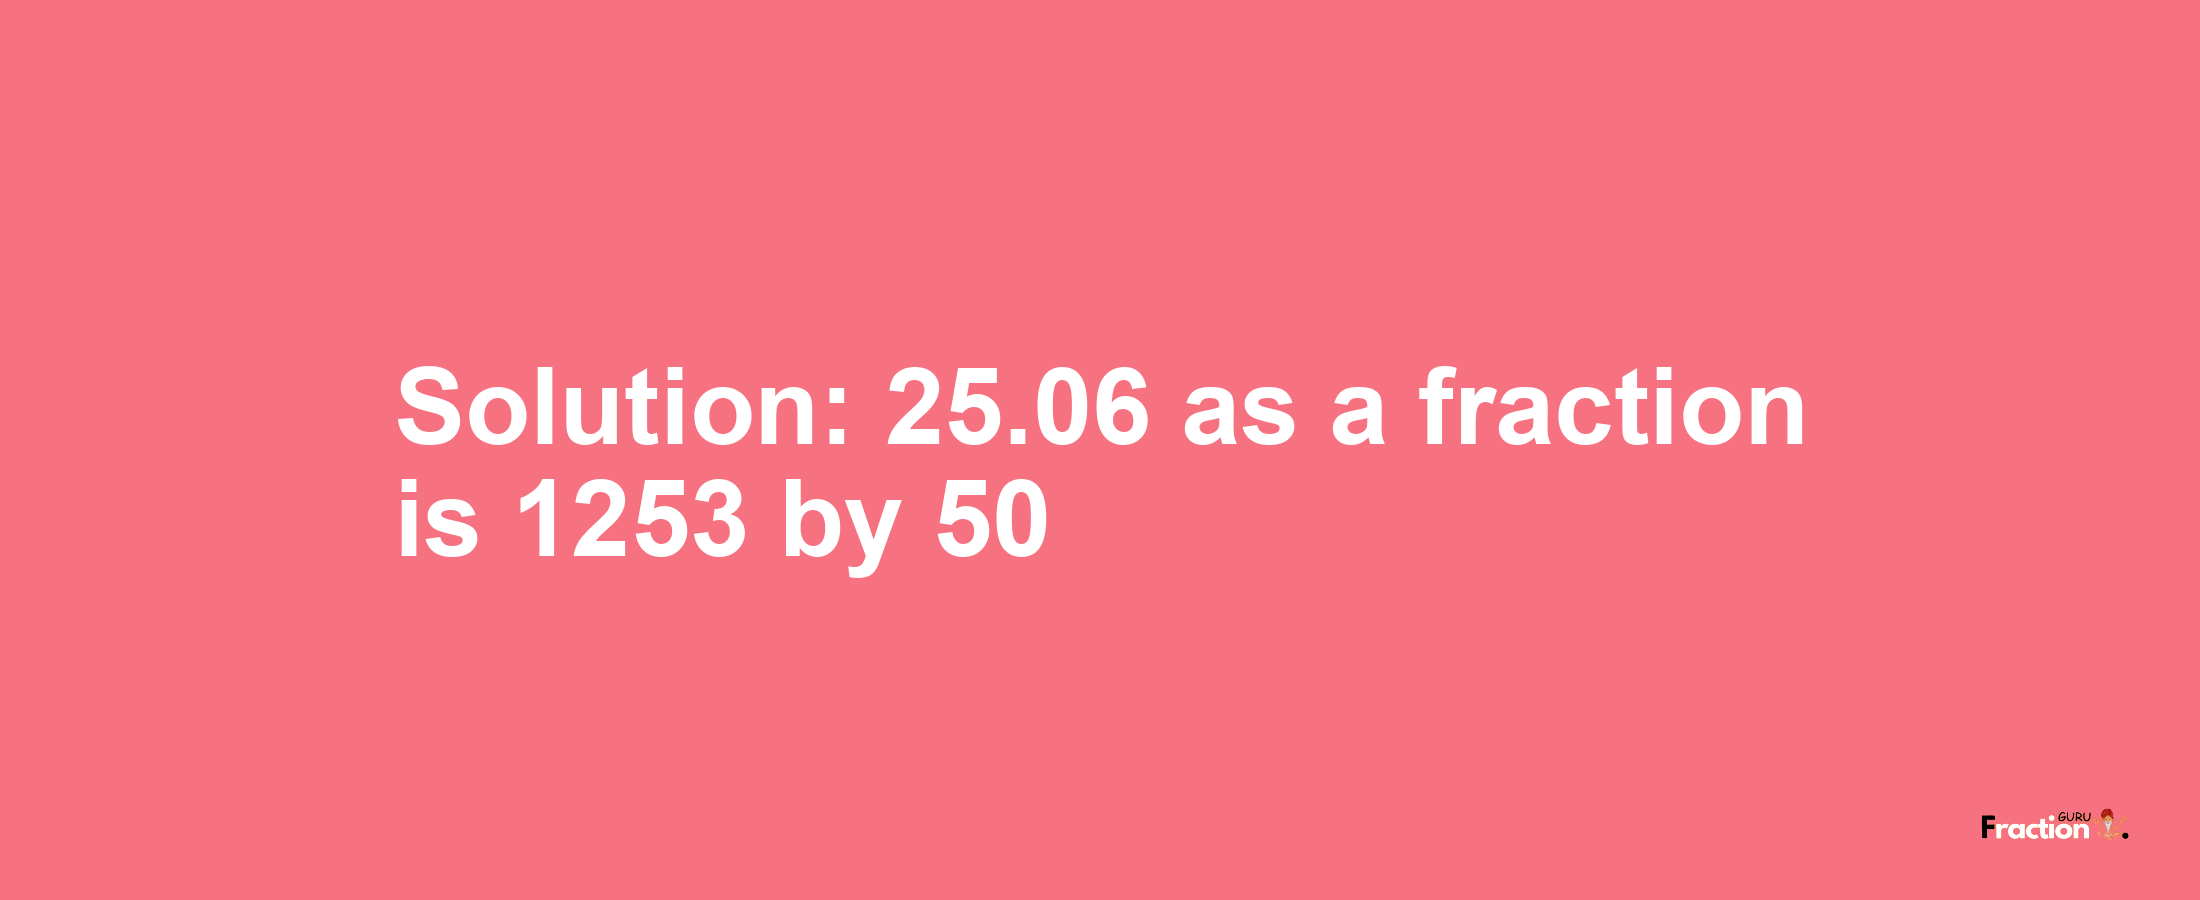 Solution:25.06 as a fraction is 1253/50